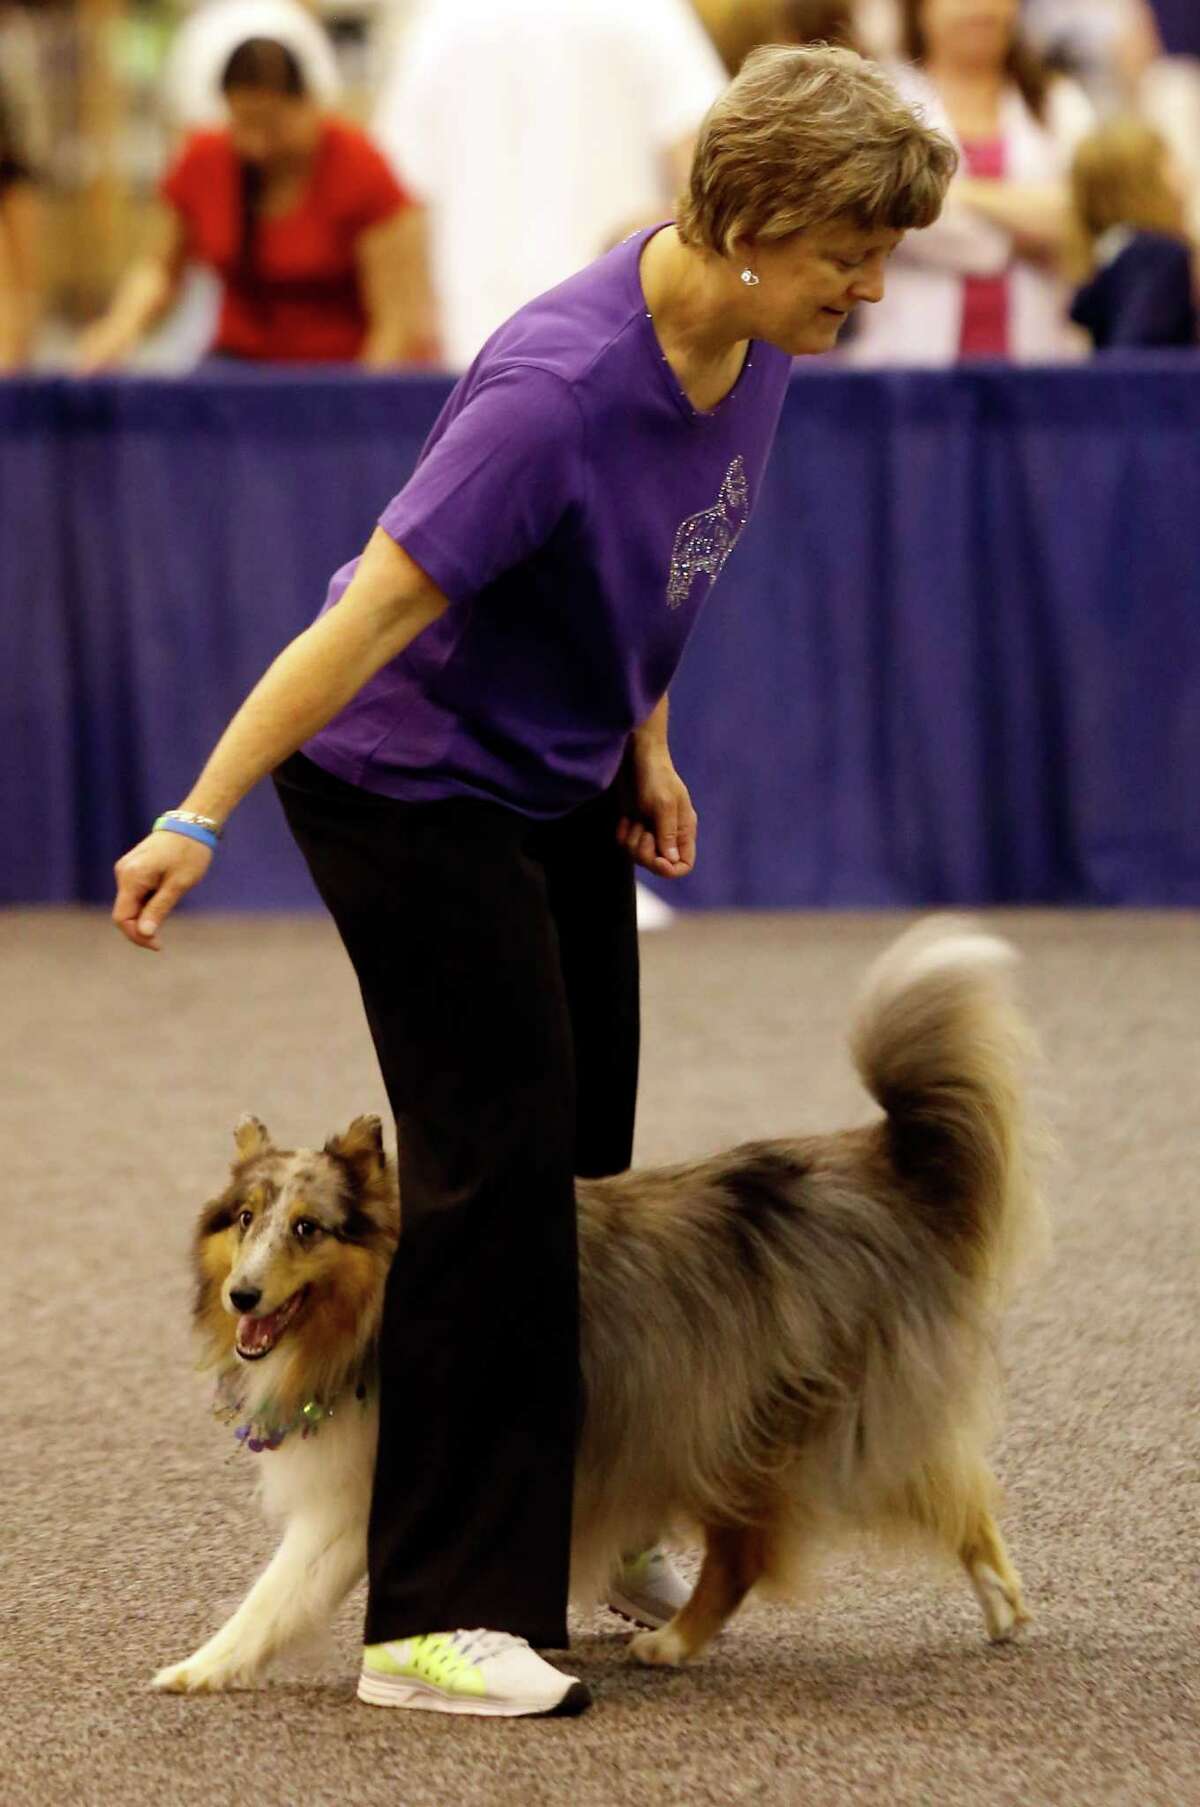 Rescue dogs take center stage at Reliant show